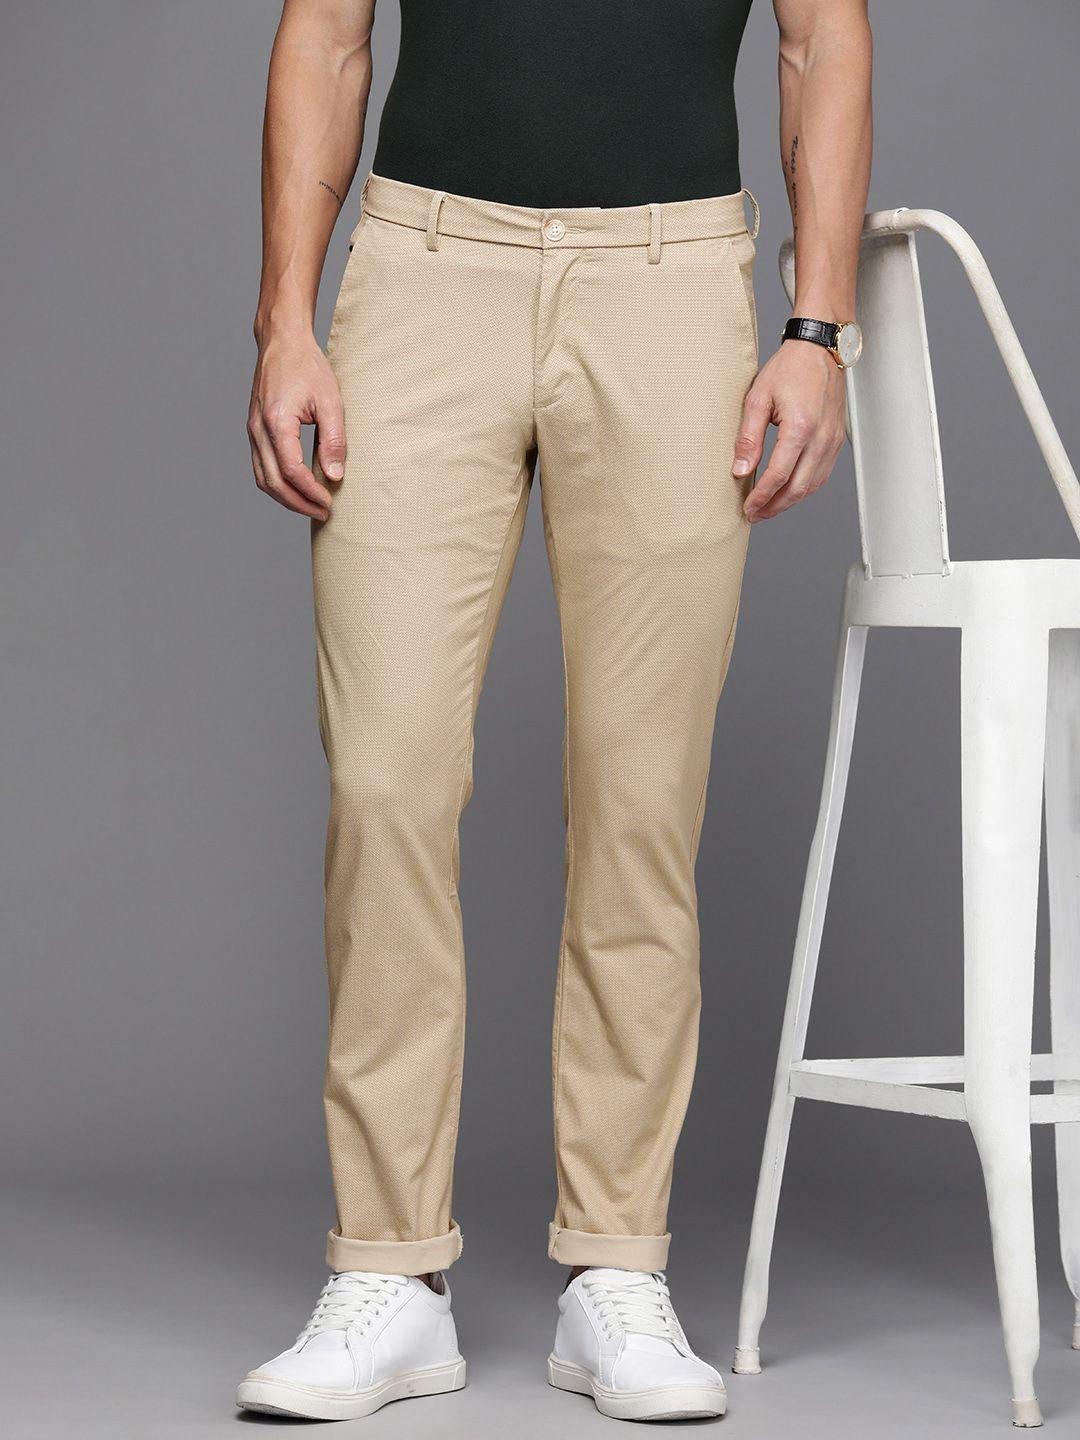 allen-solly-men-printed-slim-fit-chinos-trousers